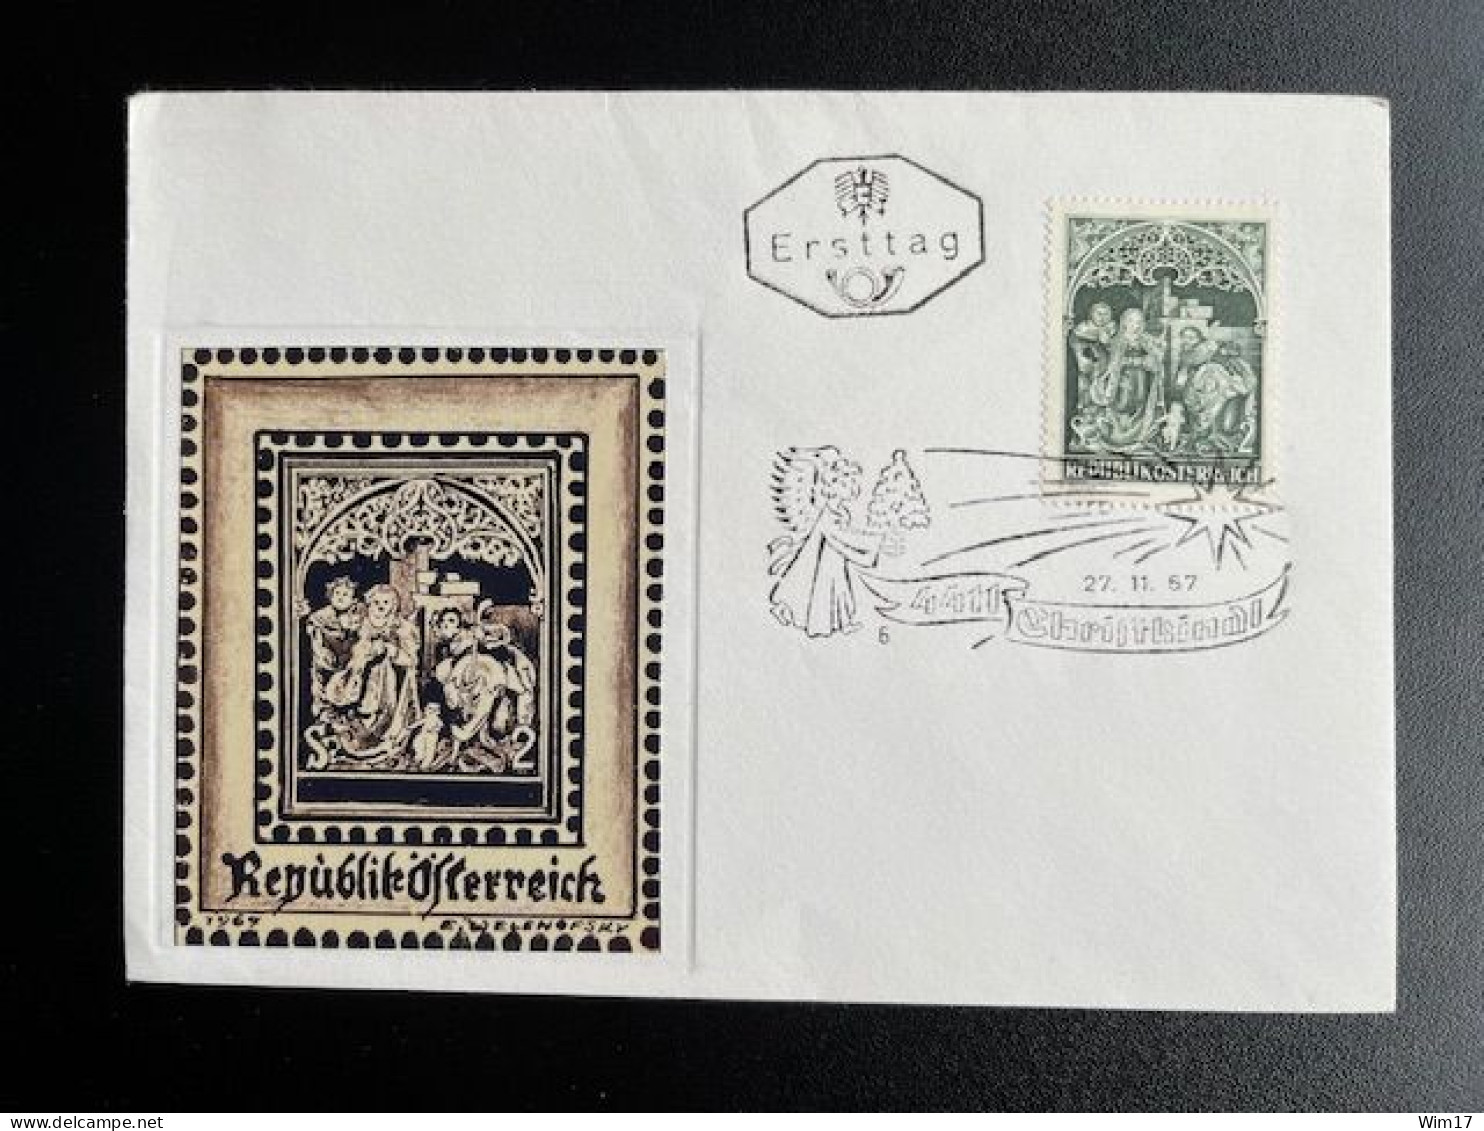 AUSTRIA 1967 FDC CHRISTKINDL 27-11-1967 OOSTENRIJK OSTERREICH - Covers & Documents